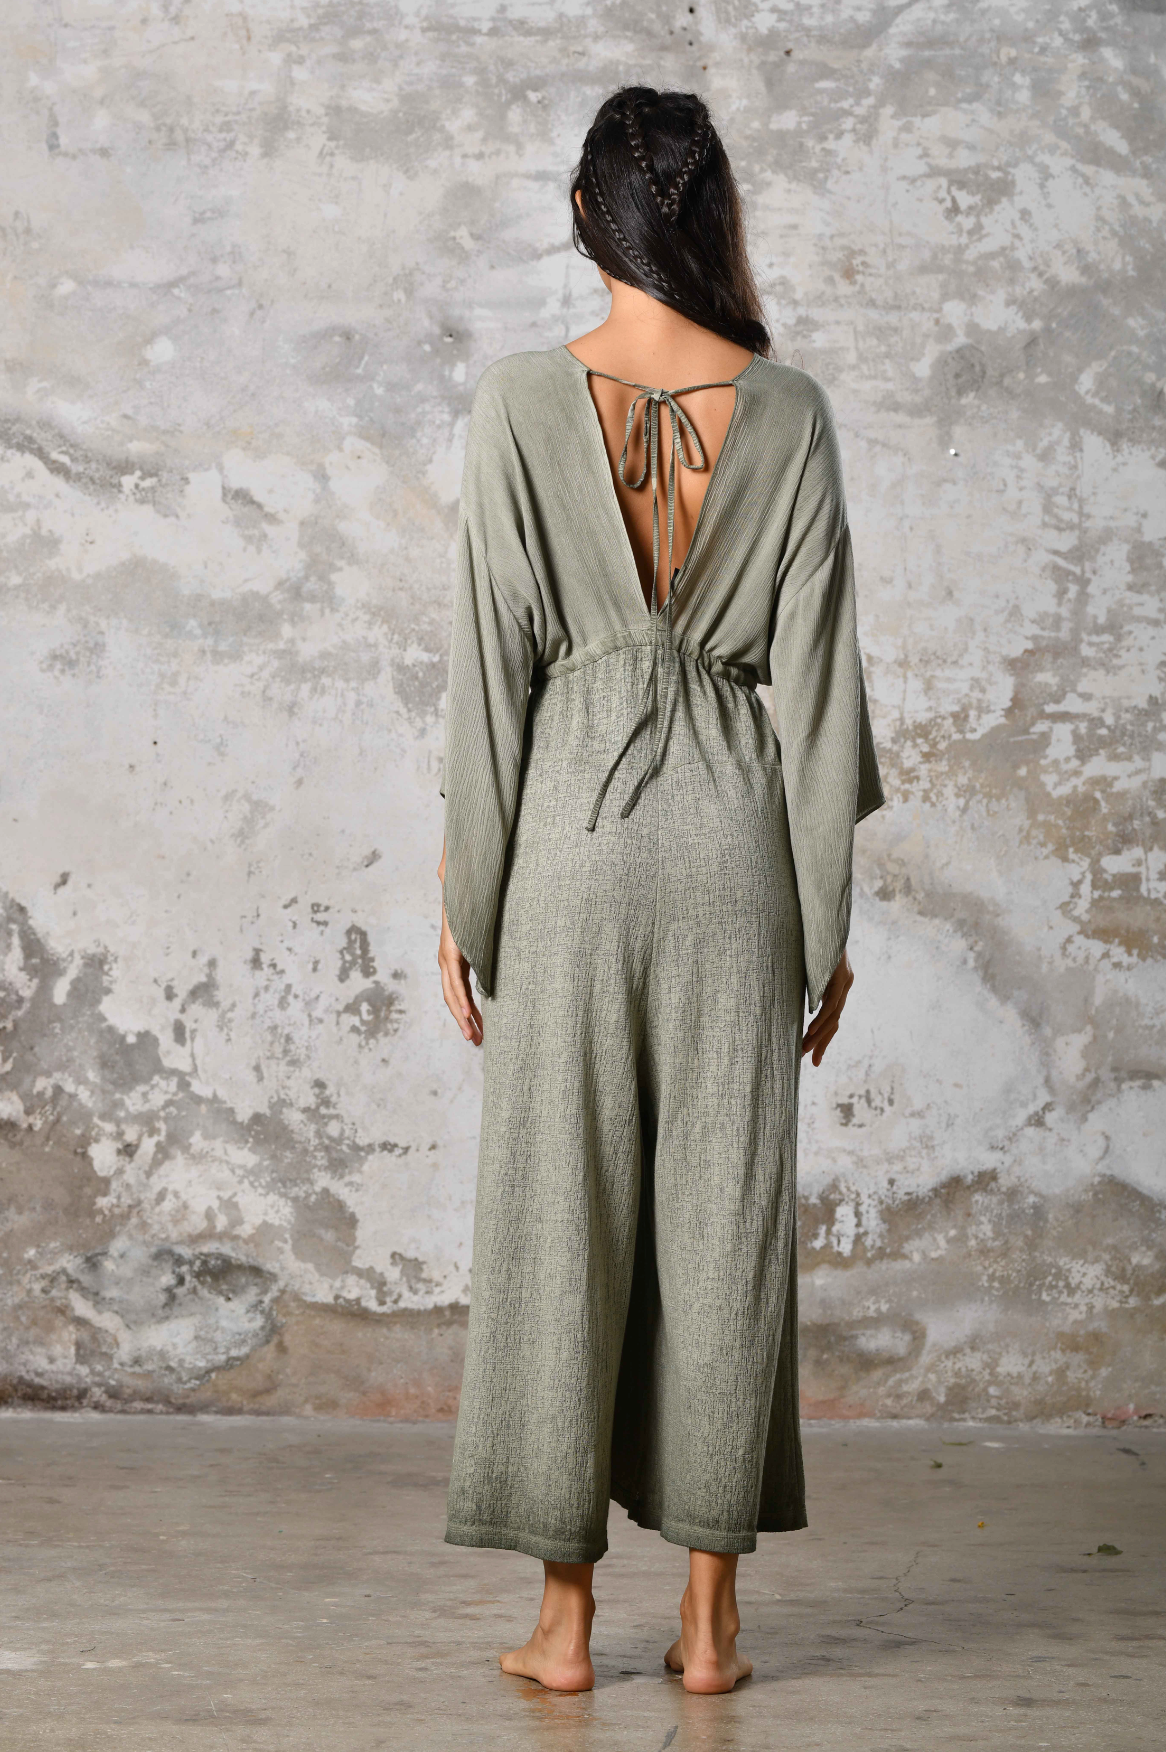 This handmade piece exudes a sense of freedom and flow, perfect for those who appreciate individuality and fashion-forward comfort. Whether you're dancing by the shore or strolling through a summer festival, this jumpsuit will ensure you stand out with grace and style. Embrace the goddess within and make a bold fashion statement with this unique piece.